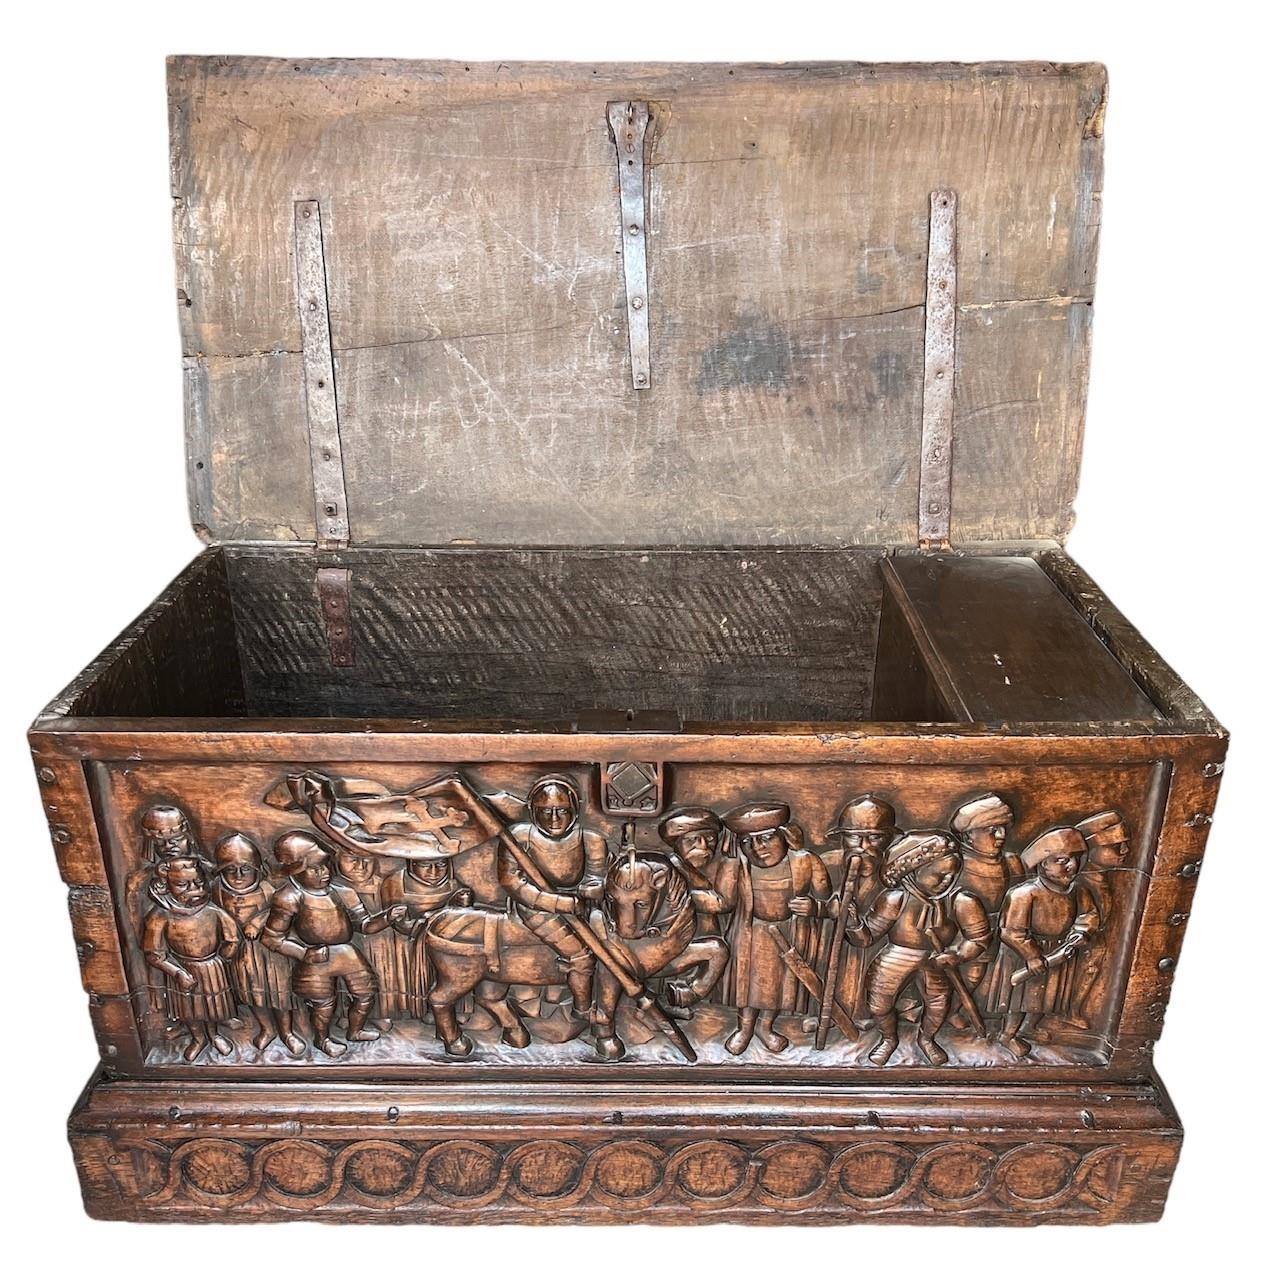 A RARE 15TH CENTURY FRENCH CARVED WALNUT COFFER,With hinge lid above carved panel in relief with a - Image 4 of 4